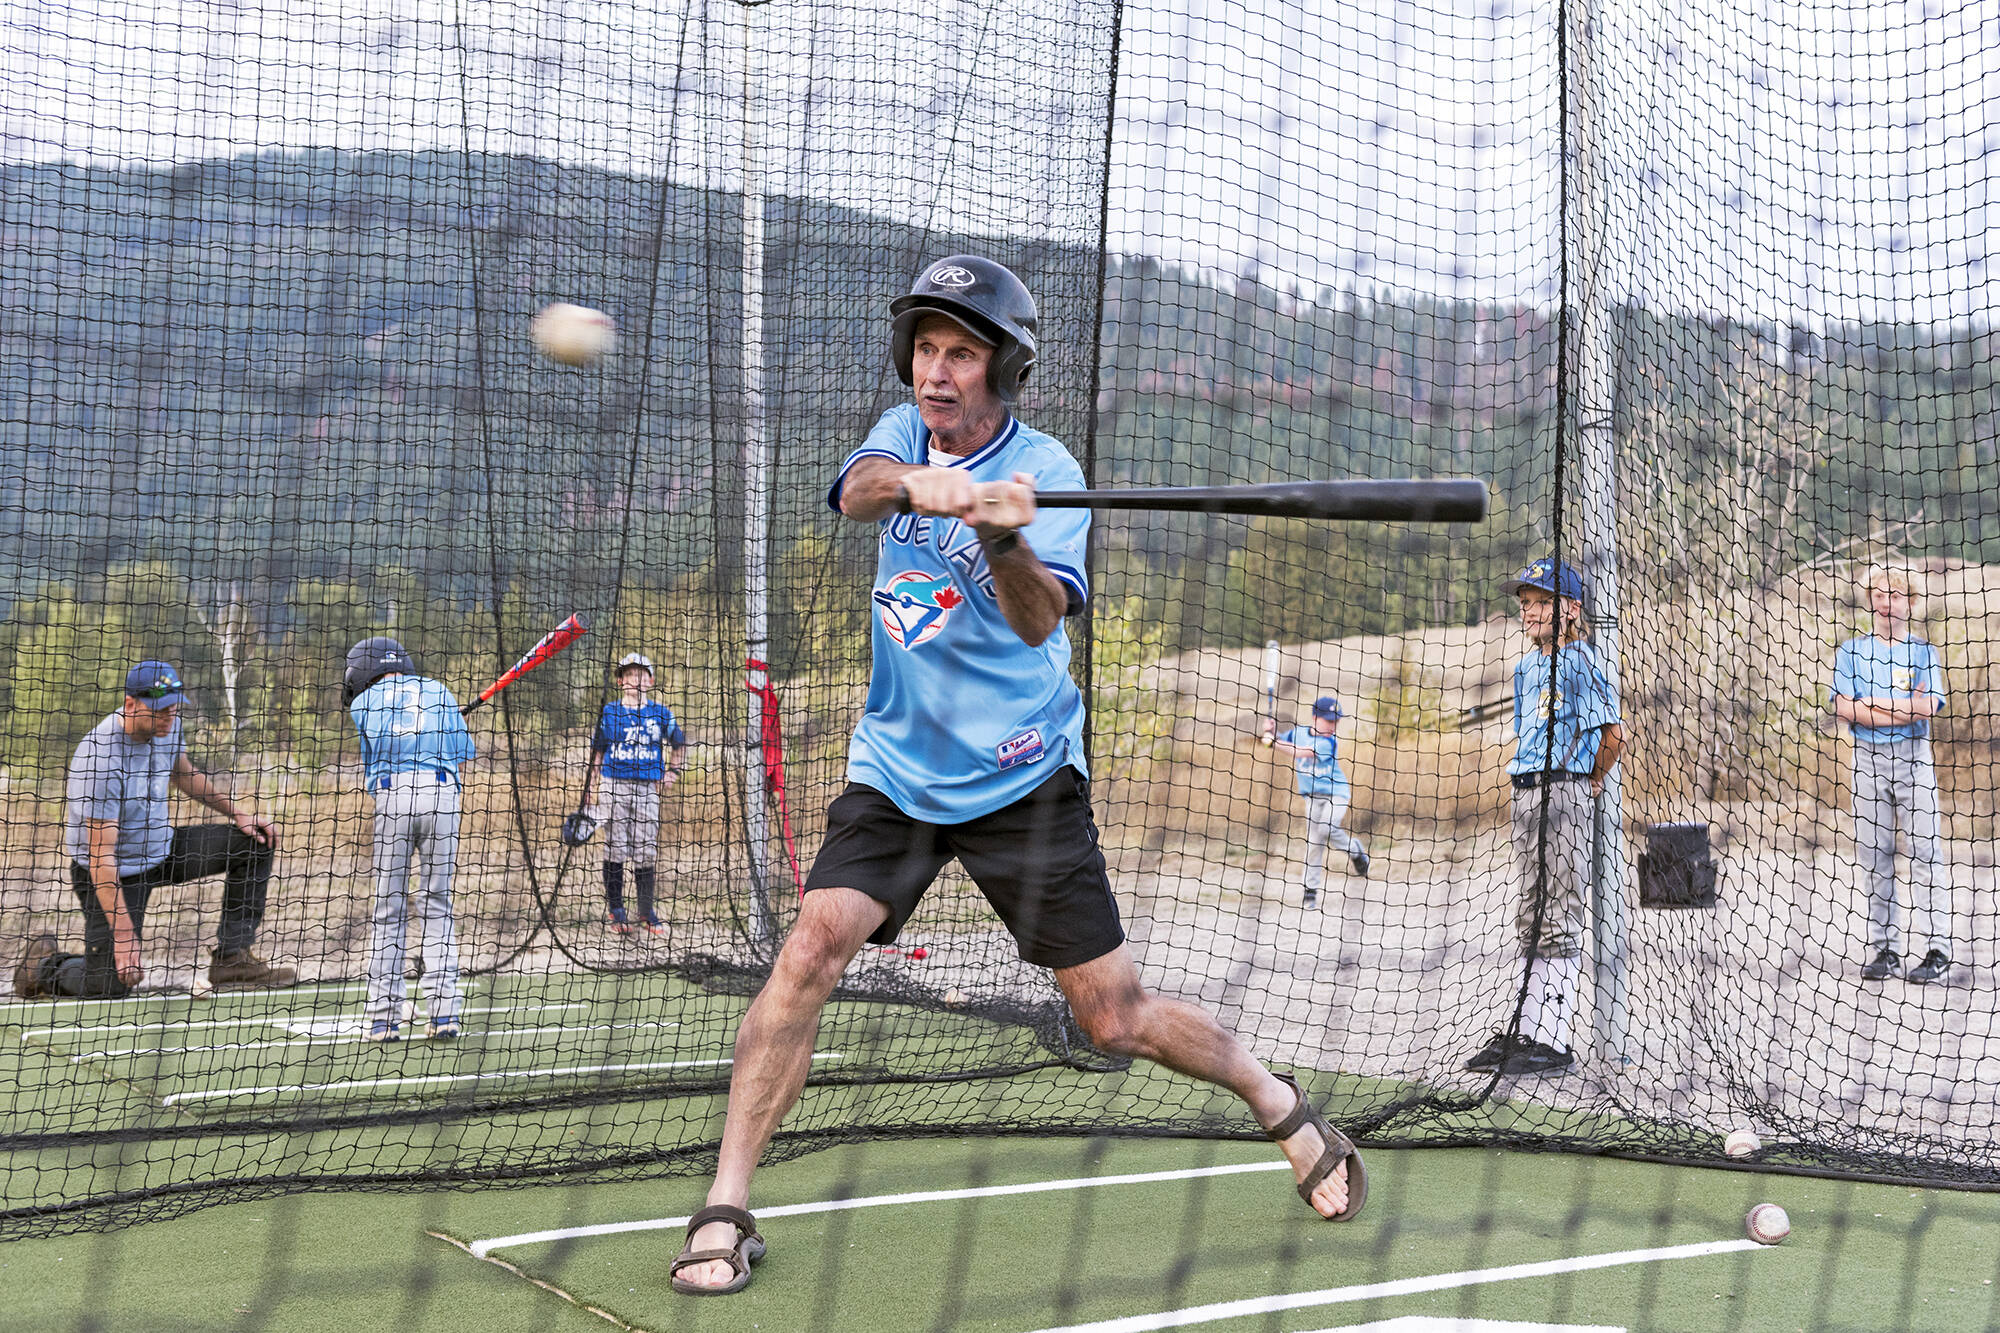 26443869_web1_210915-SAA-batting-cages-open_1